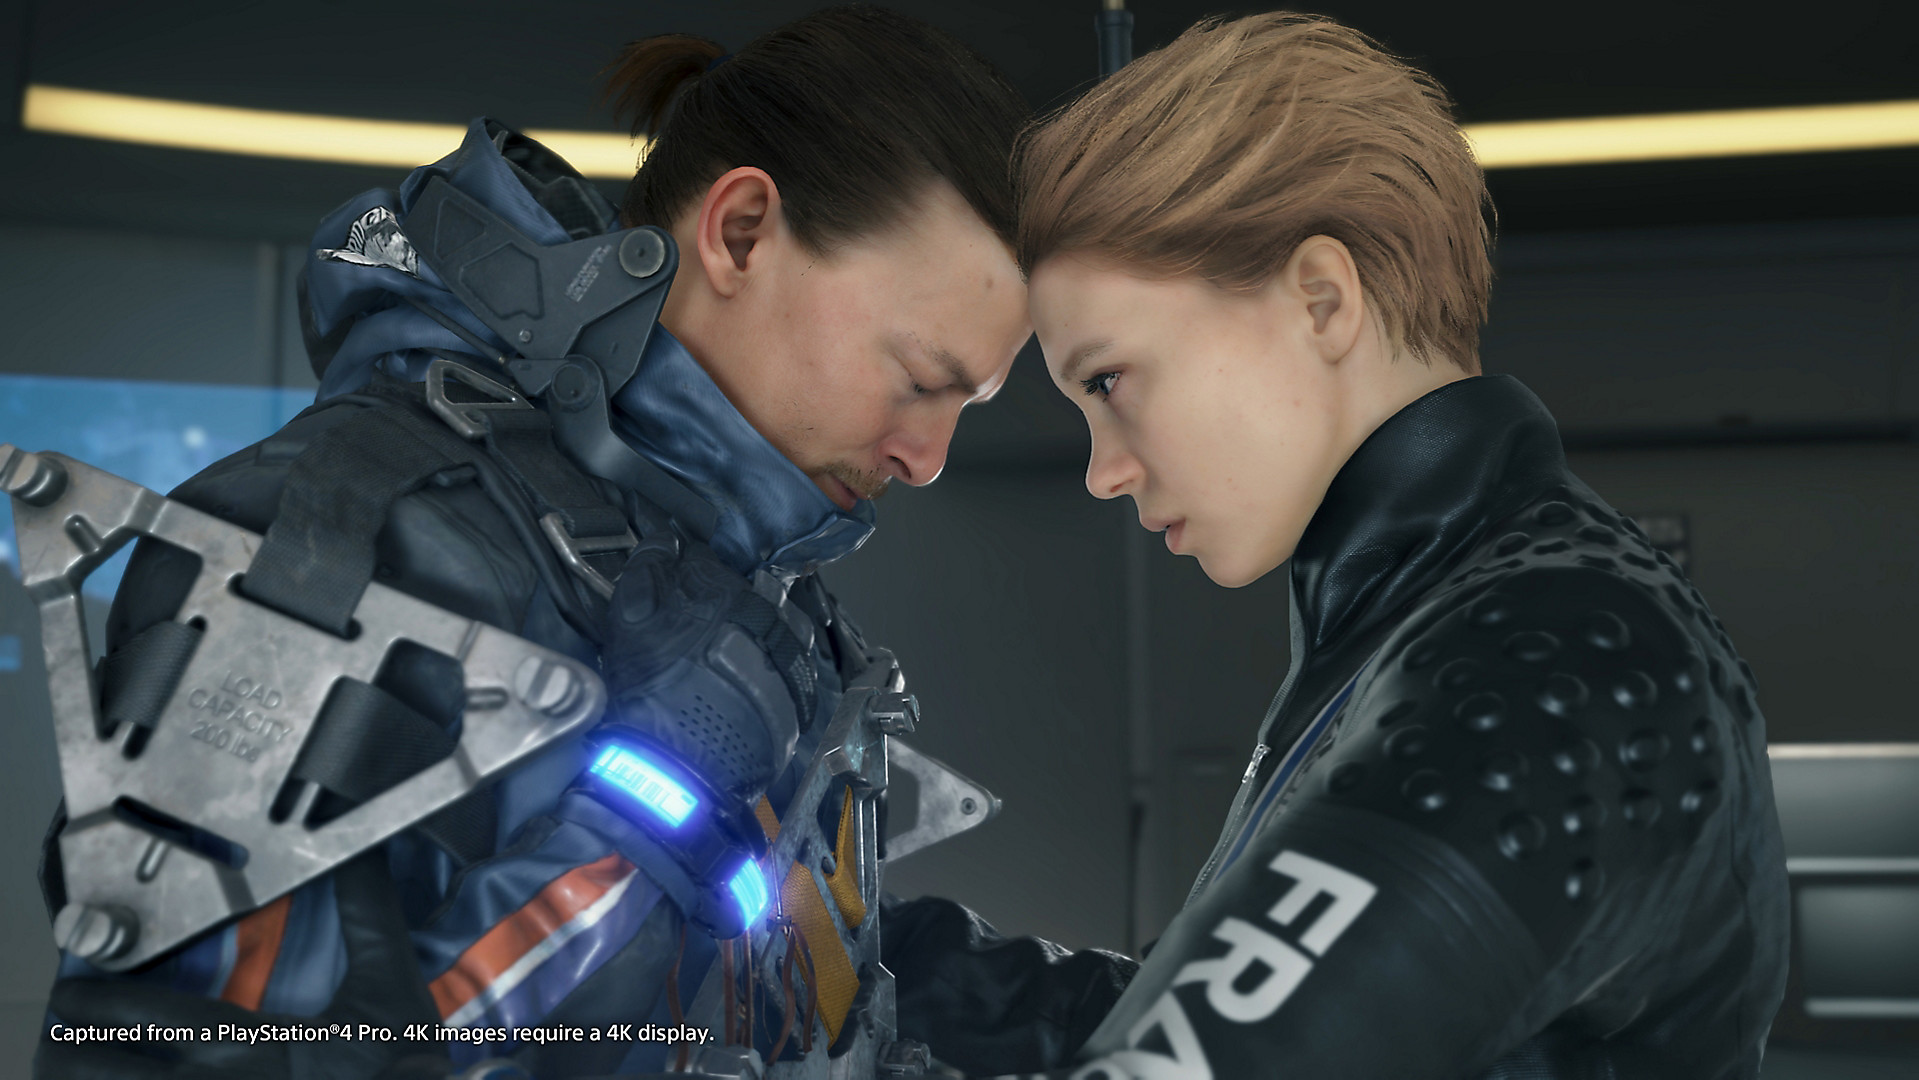 Sam Porter Bridges and Fragile press their heads together in a screenshot from Death Stranding